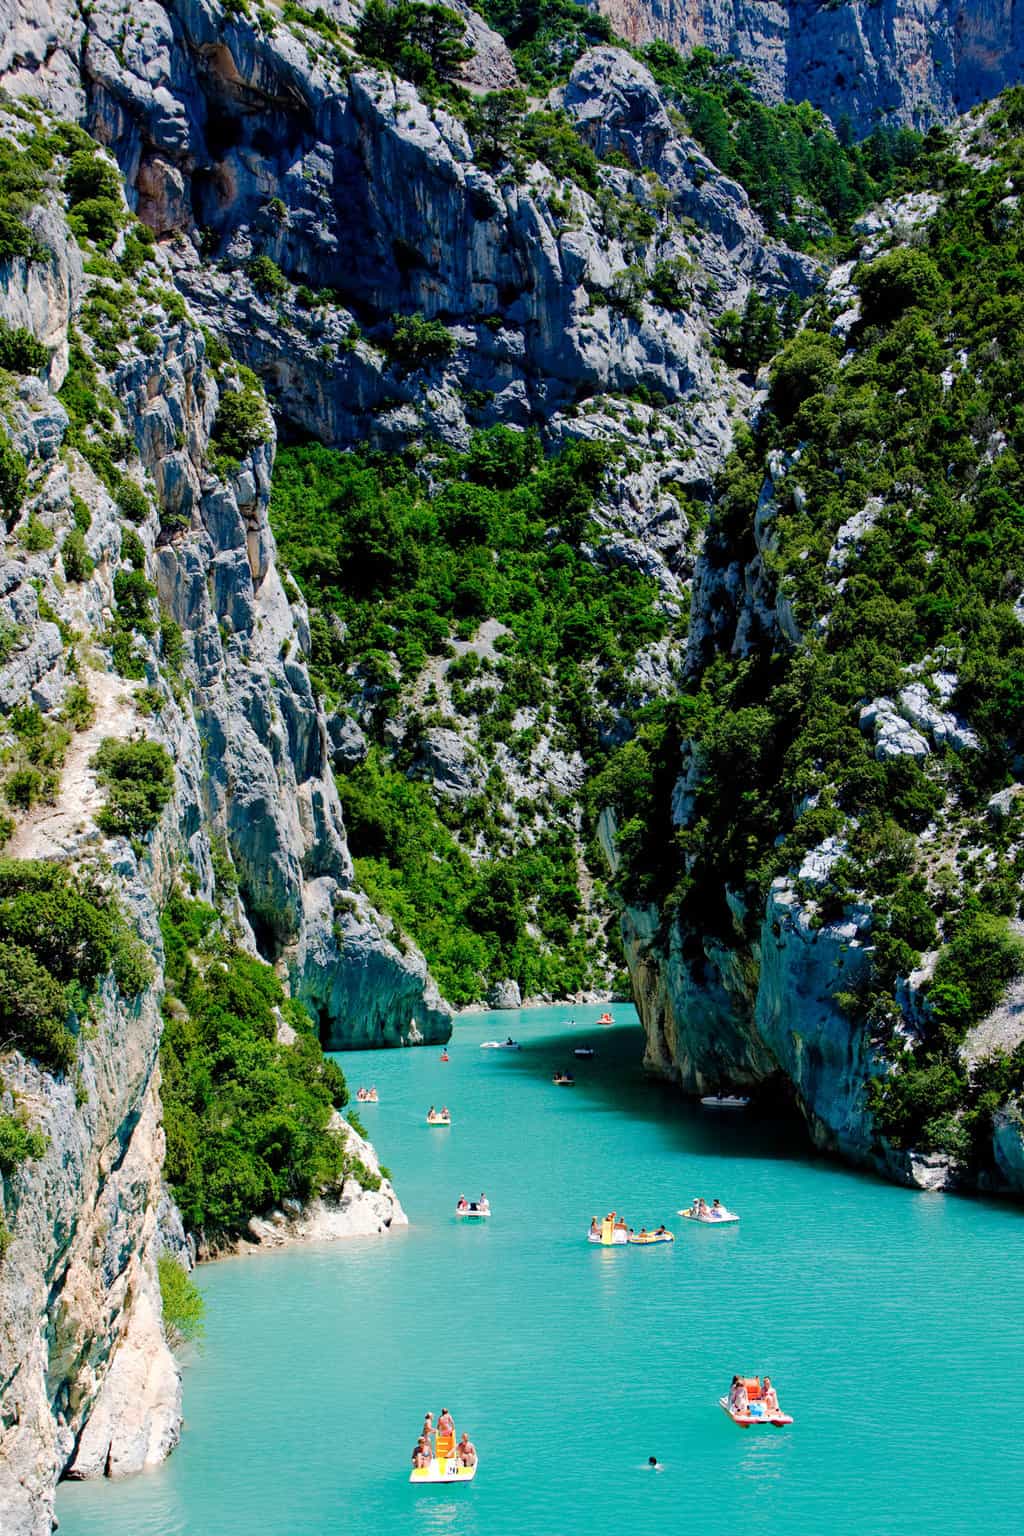 people on paddle boats on turquoise blue water surrounded by white limestone cliffs. 